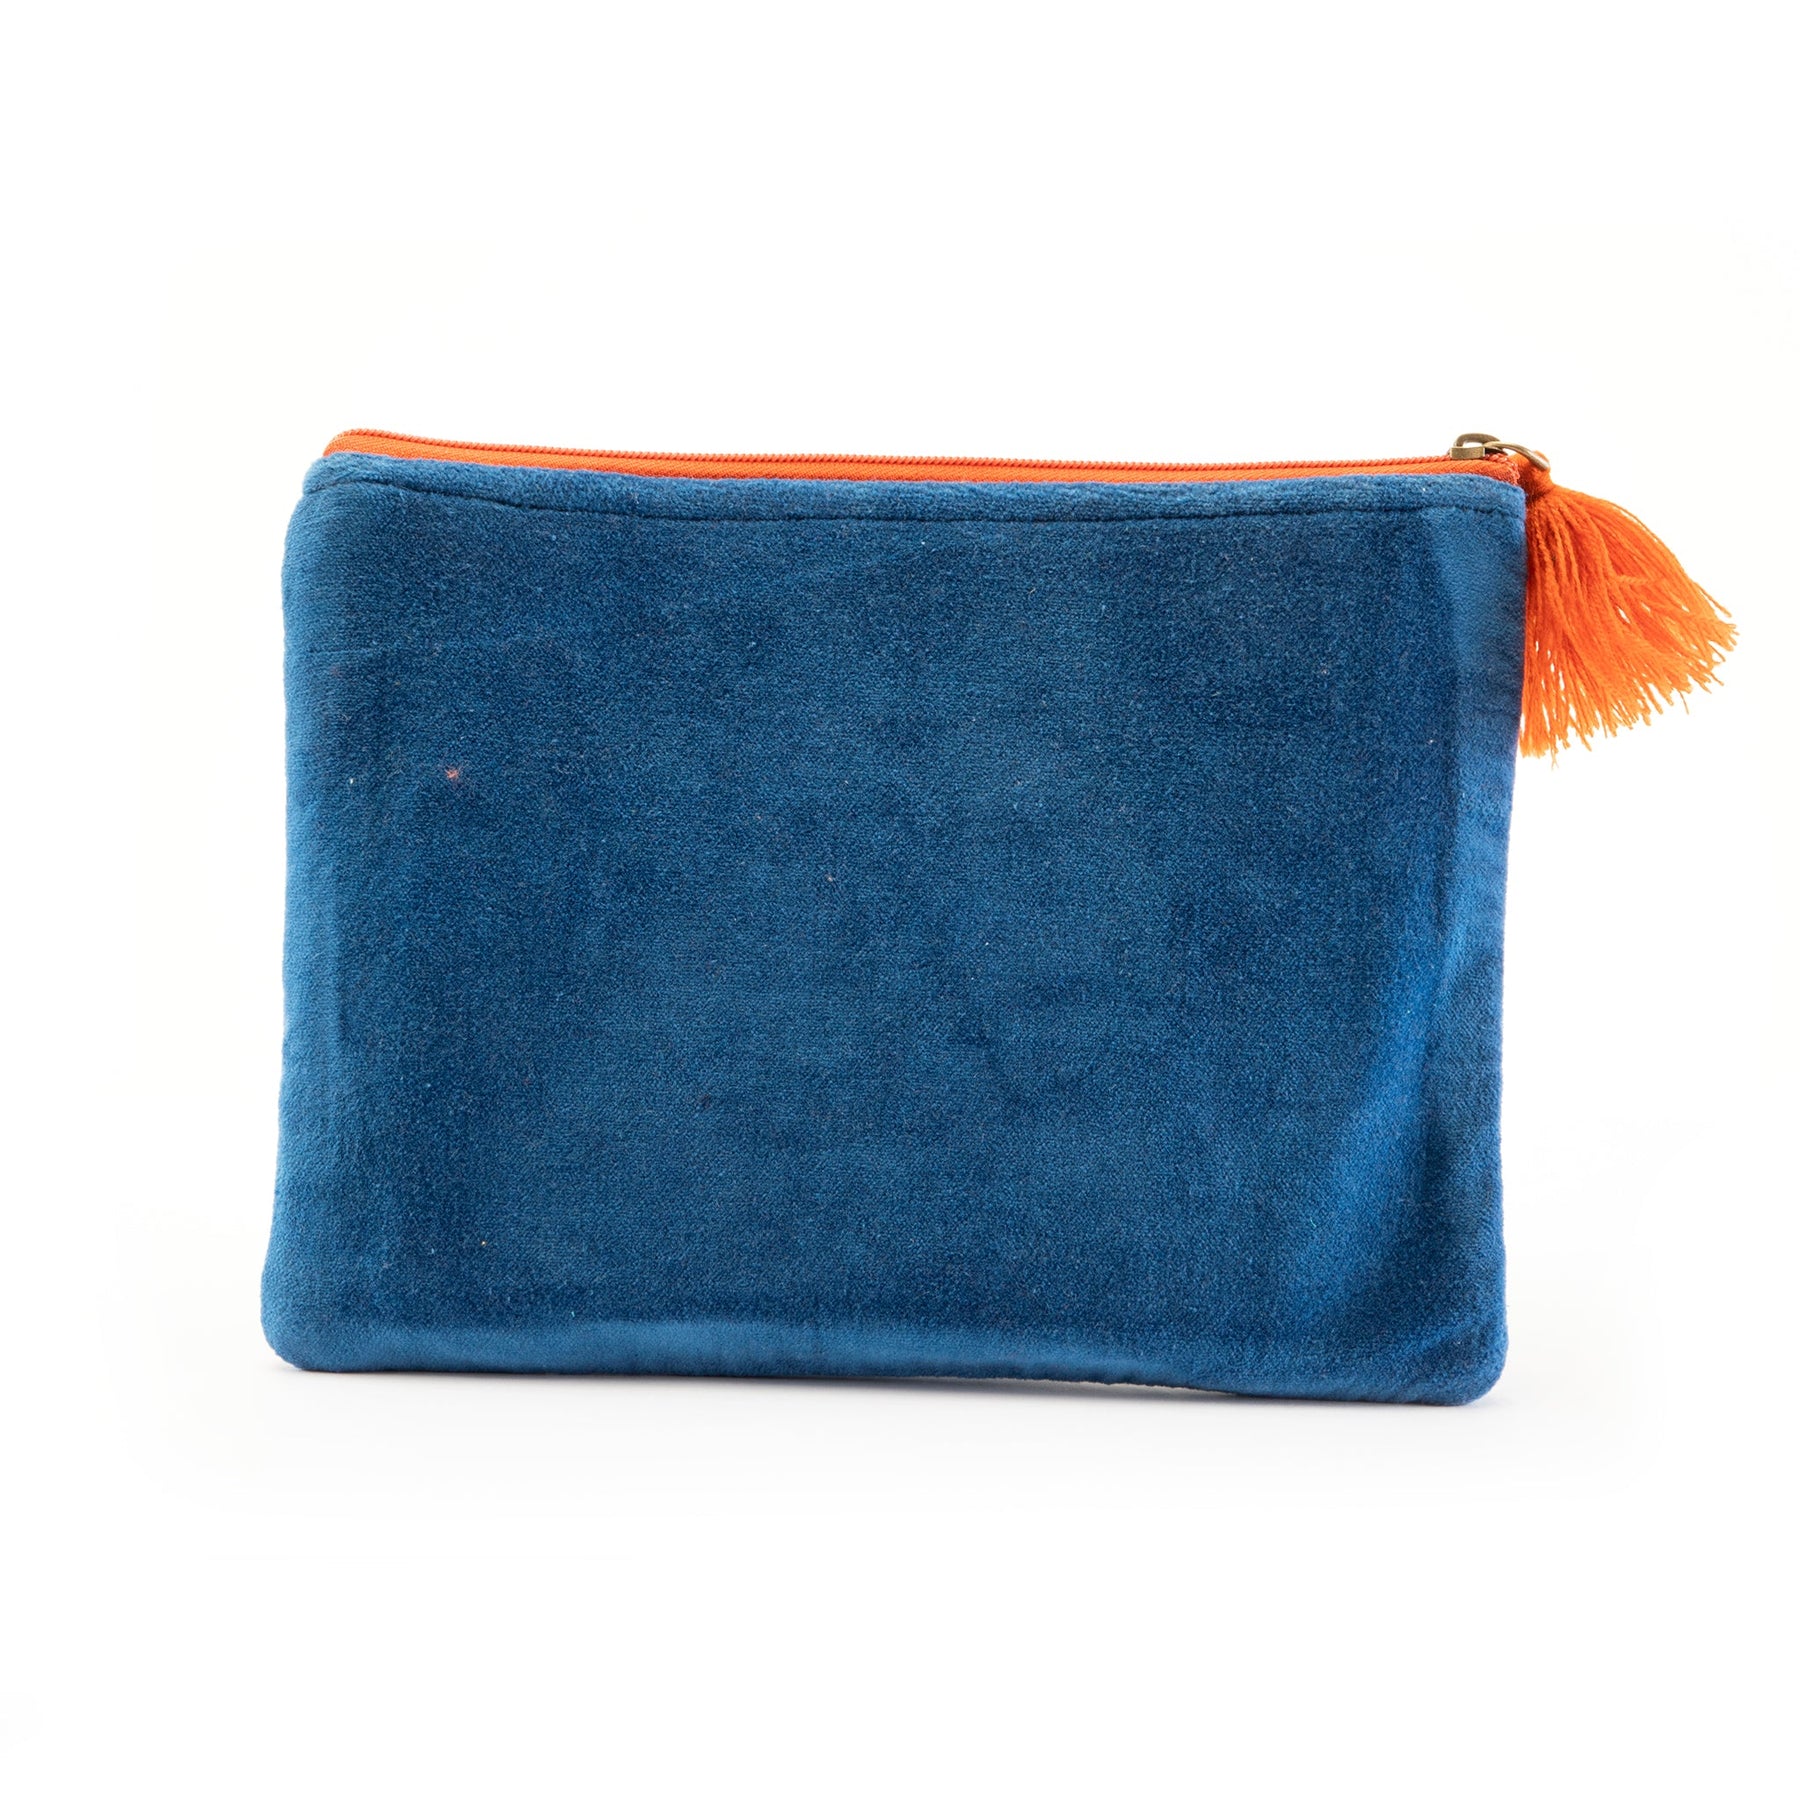 Embroidered Makeup Pouch-Royal Blue Chinoisserie